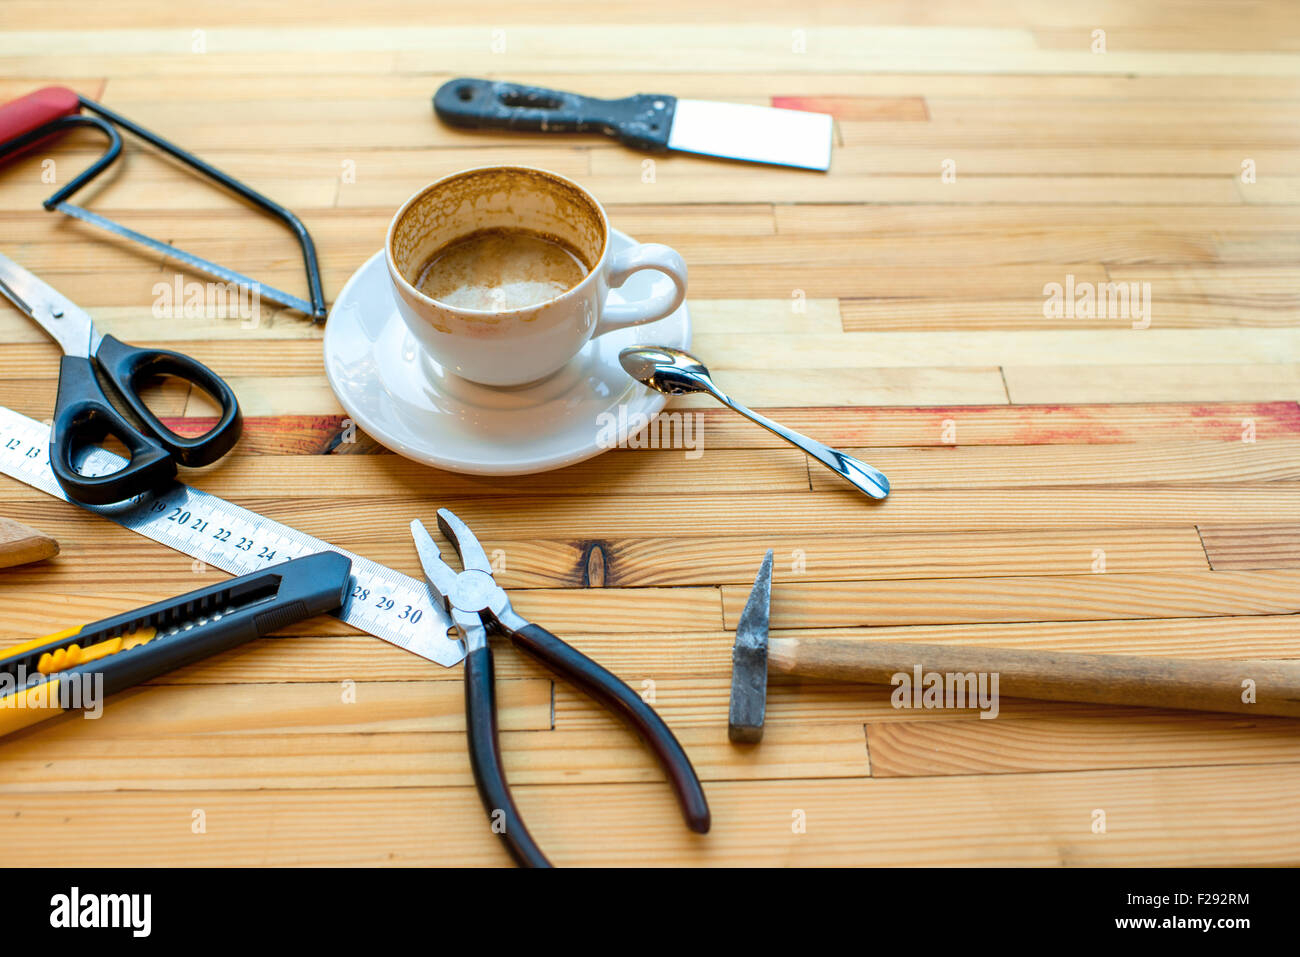 Different reapair instruments with cup of coffee on the woden table Stock Photo